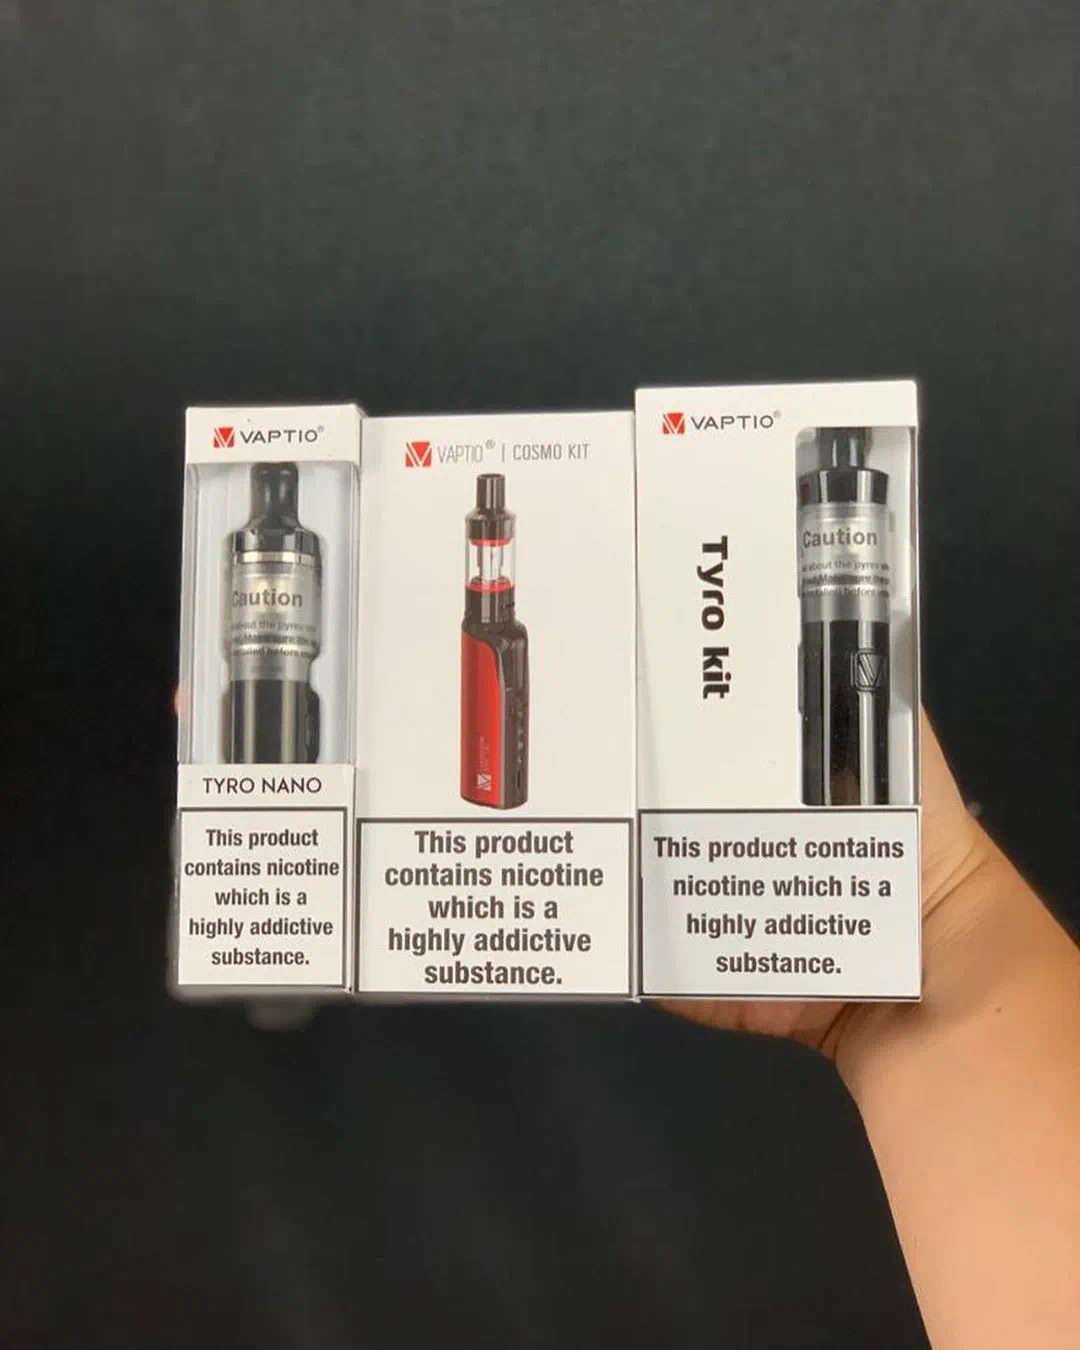 Review - IGET HOT 5500 PUFFS